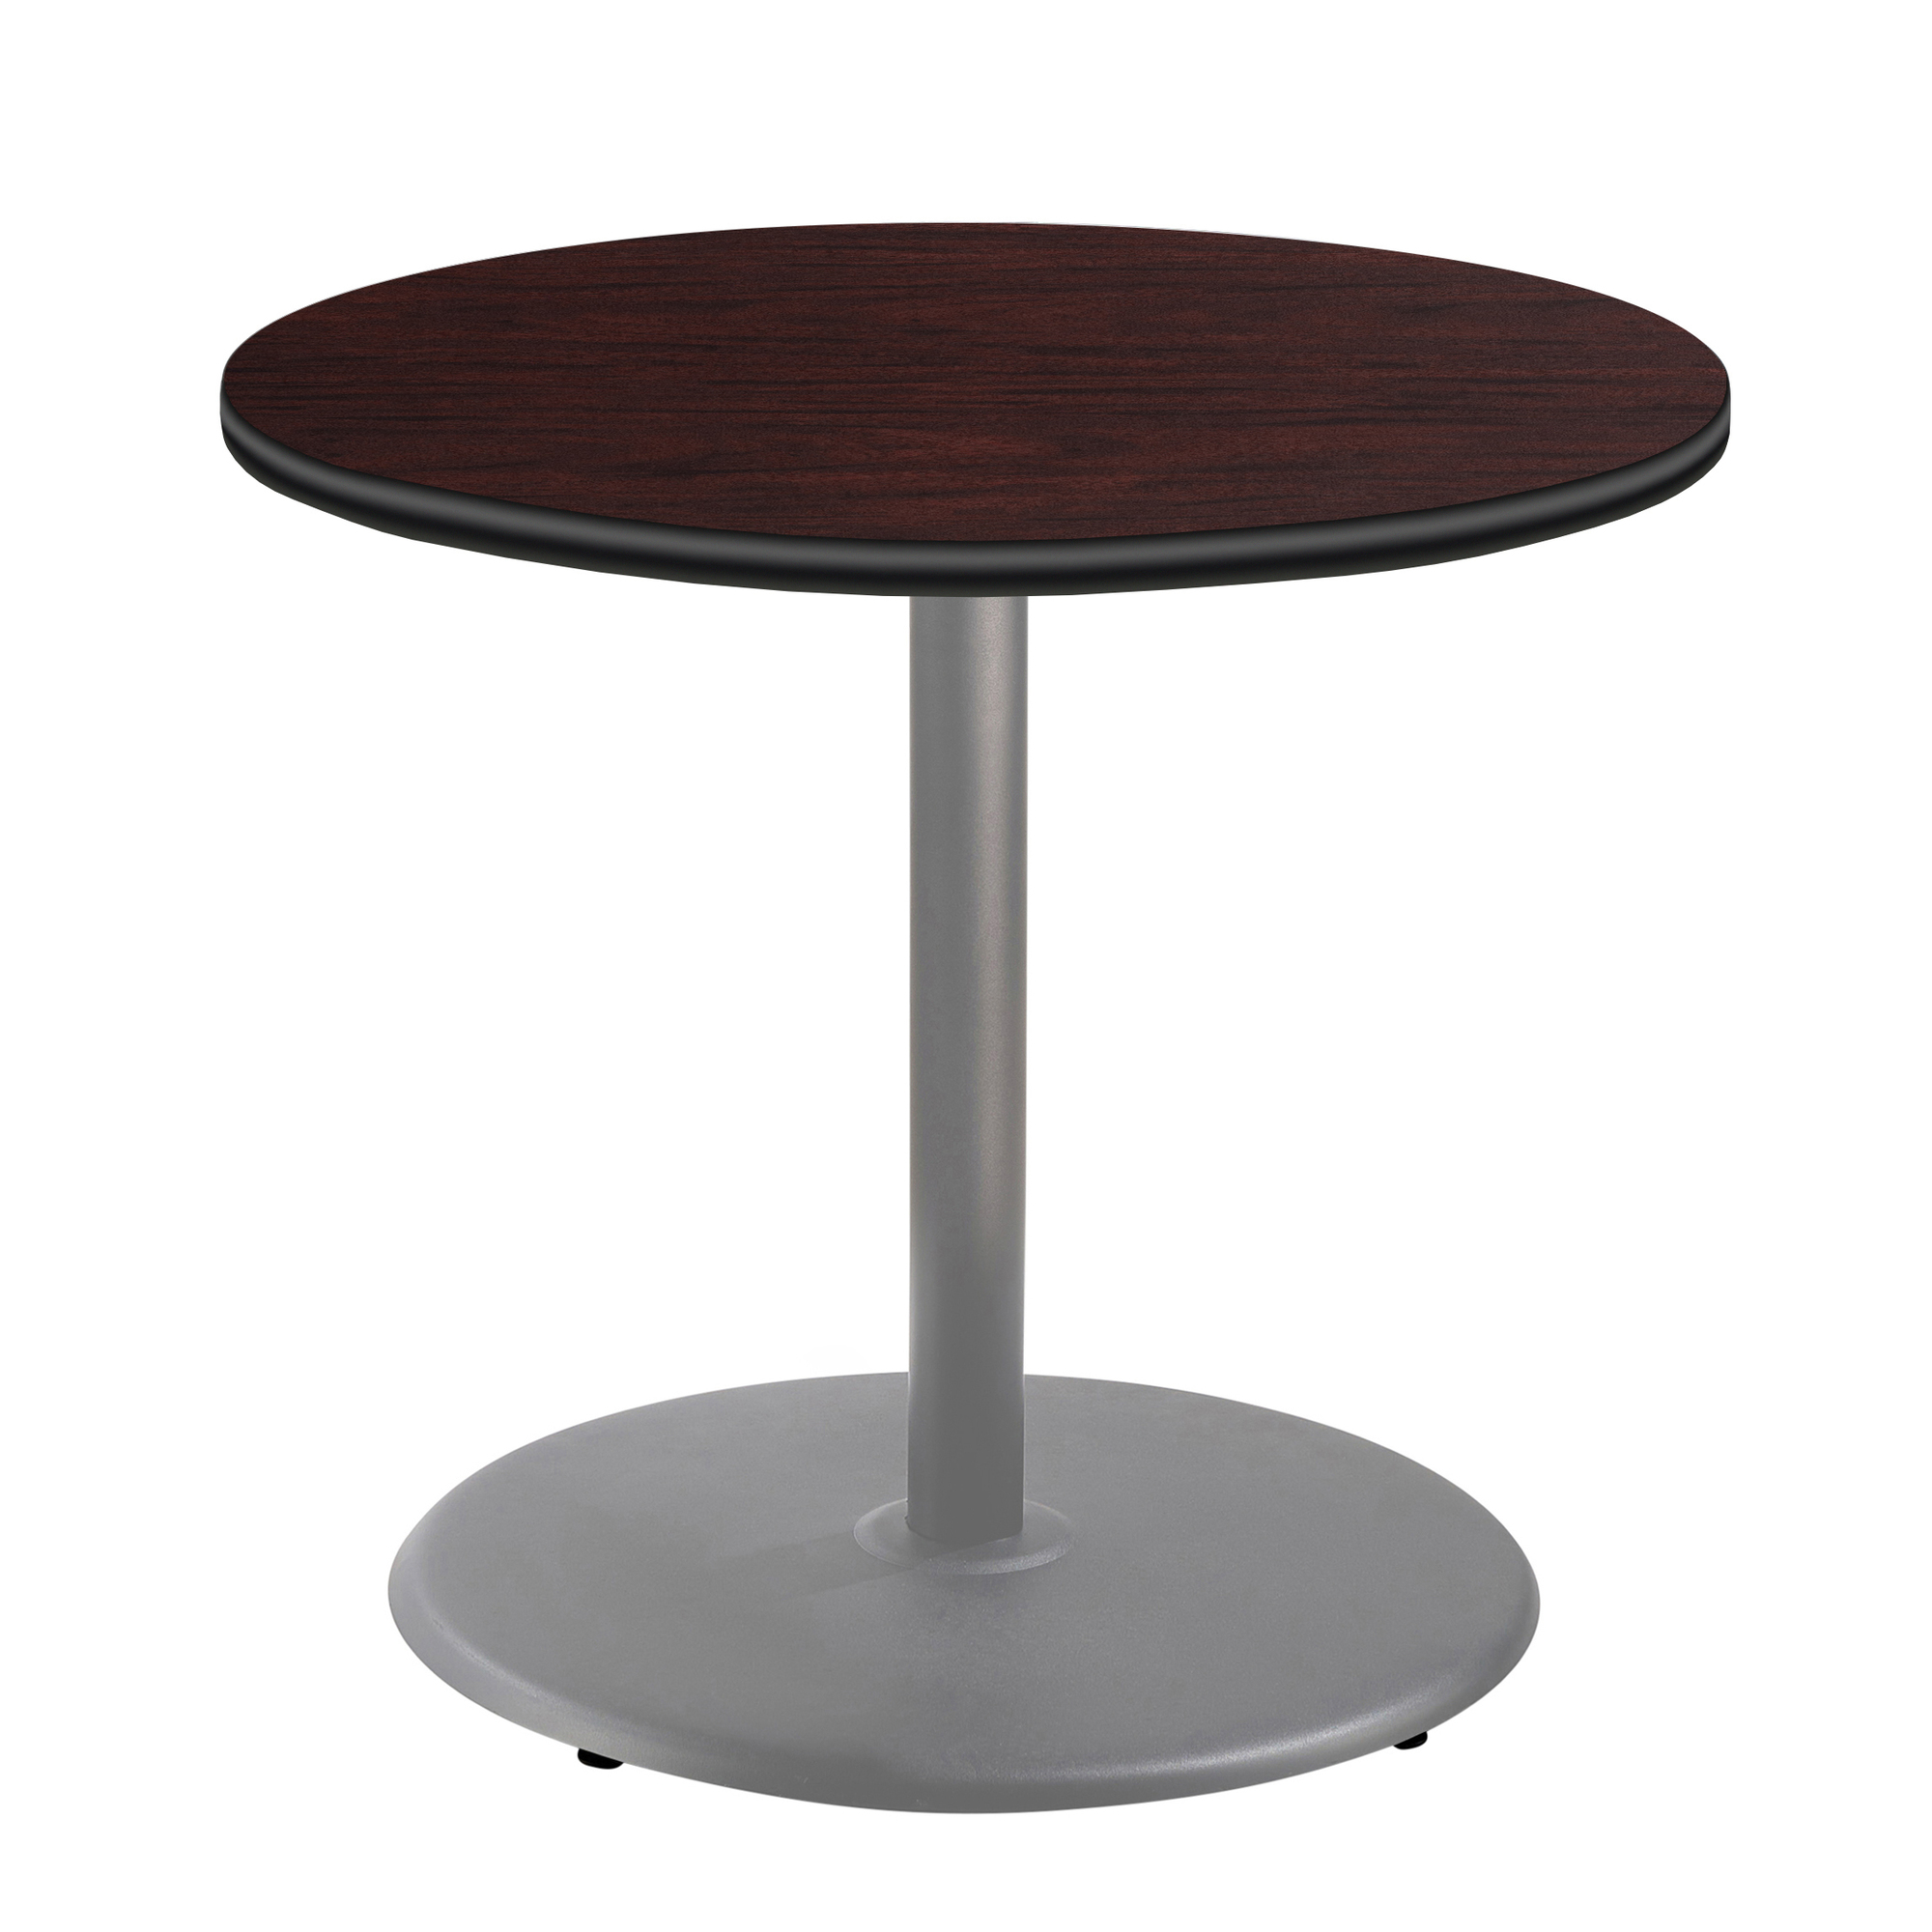 "National Public Seating, Cafe Table, 36x36x30 Round ""R"" Base, Height 30 in, Model CTG13636RDPBTMMY"